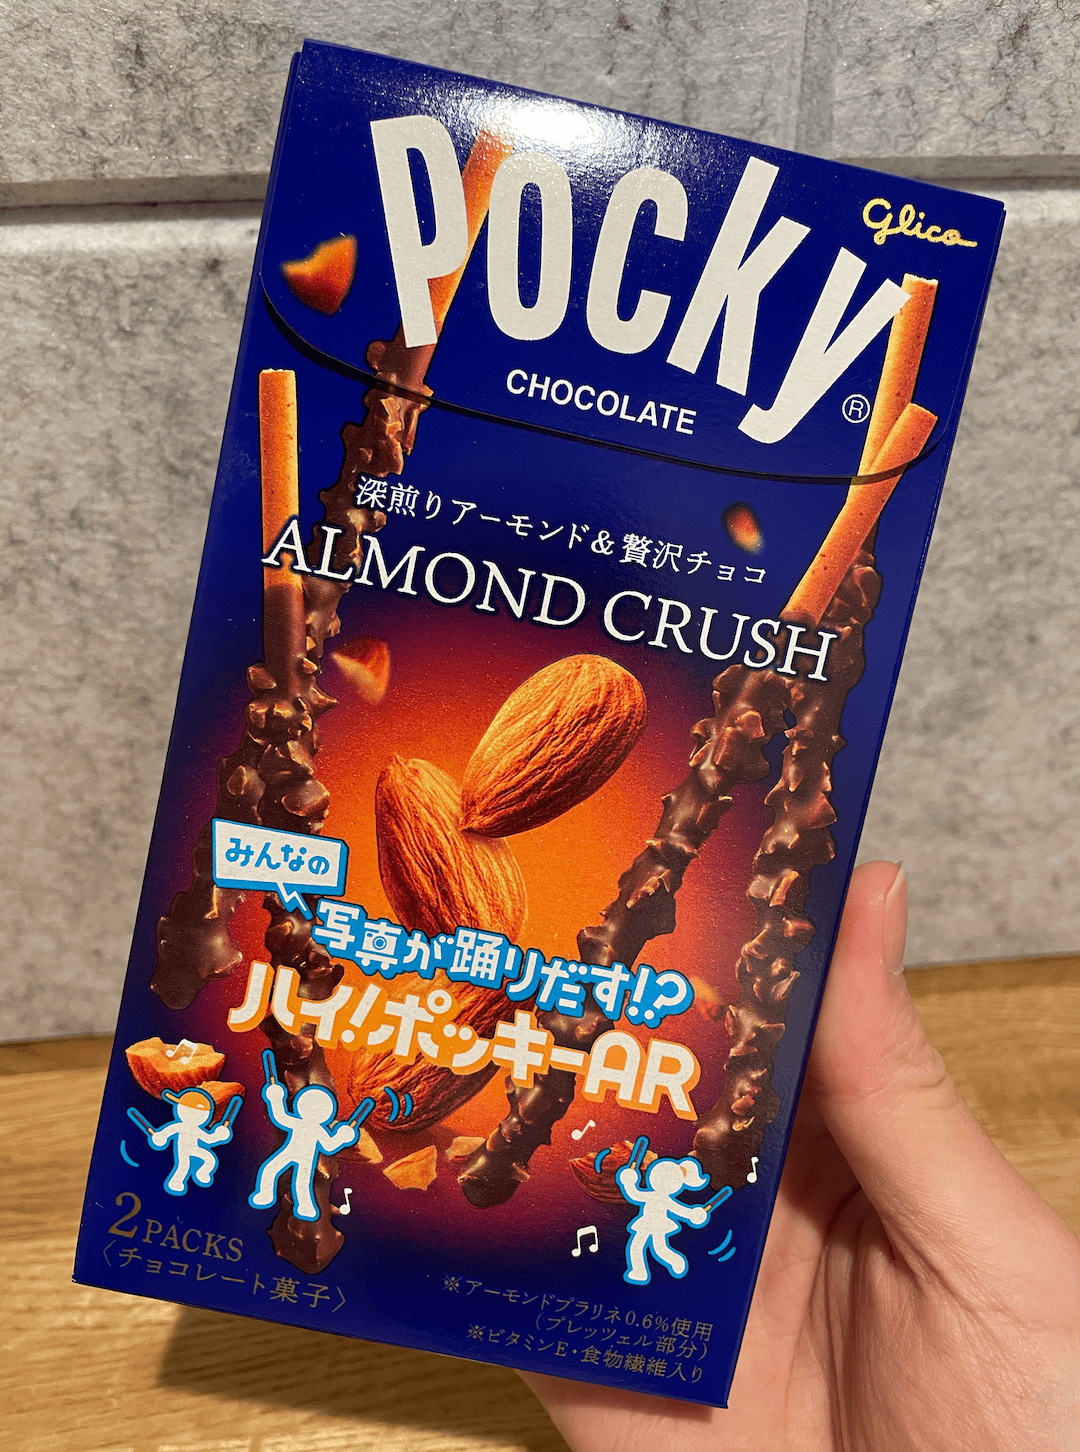 Actual product image of Almond Crushed Pocky 1